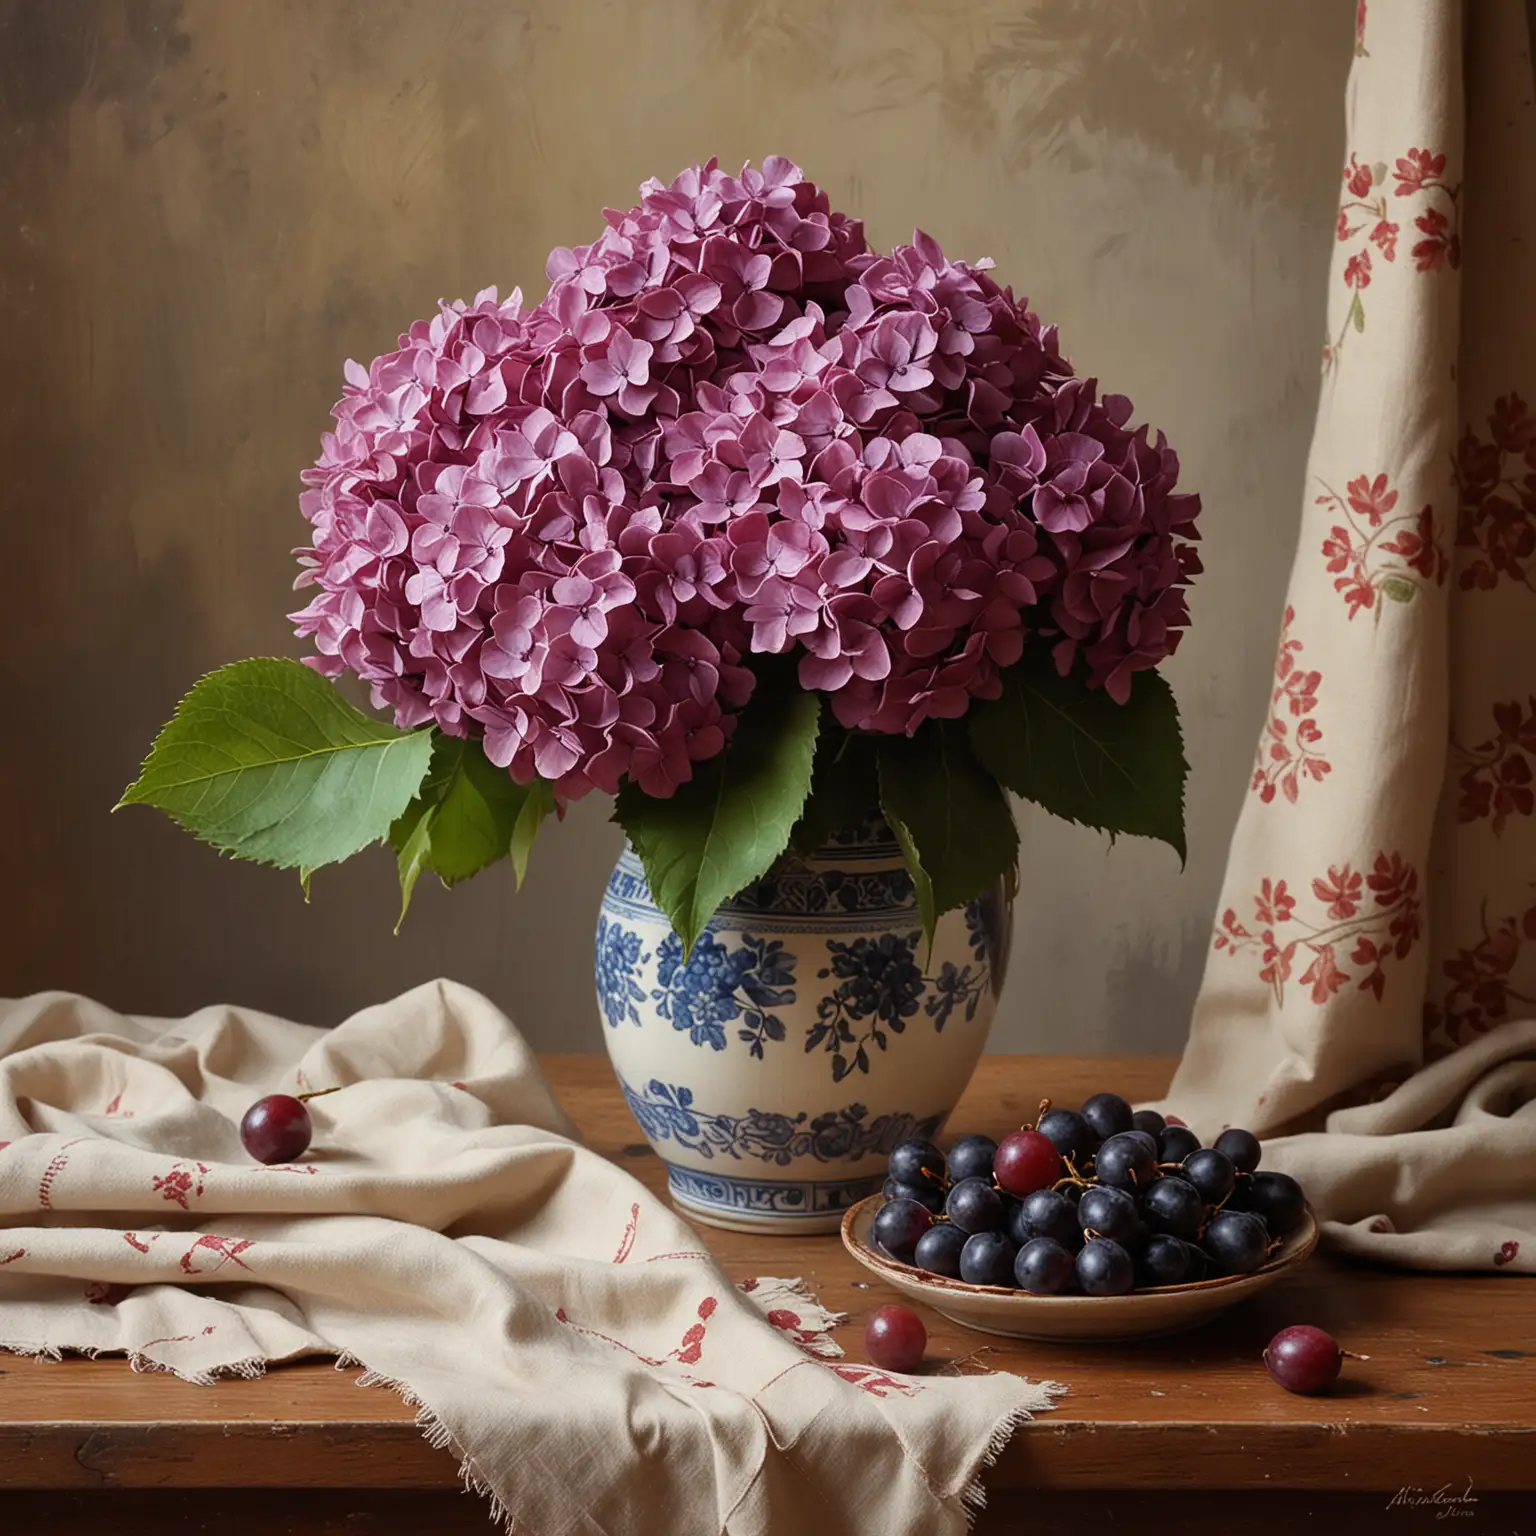 a sttill life painting  of A SMALL BOQUET PF PURPLE HYDRANGEAS IN A VASE,  ON THE TABLE WITH A SMALL BUNCH OF DARK RED GRAPES ON A CLOTH,  